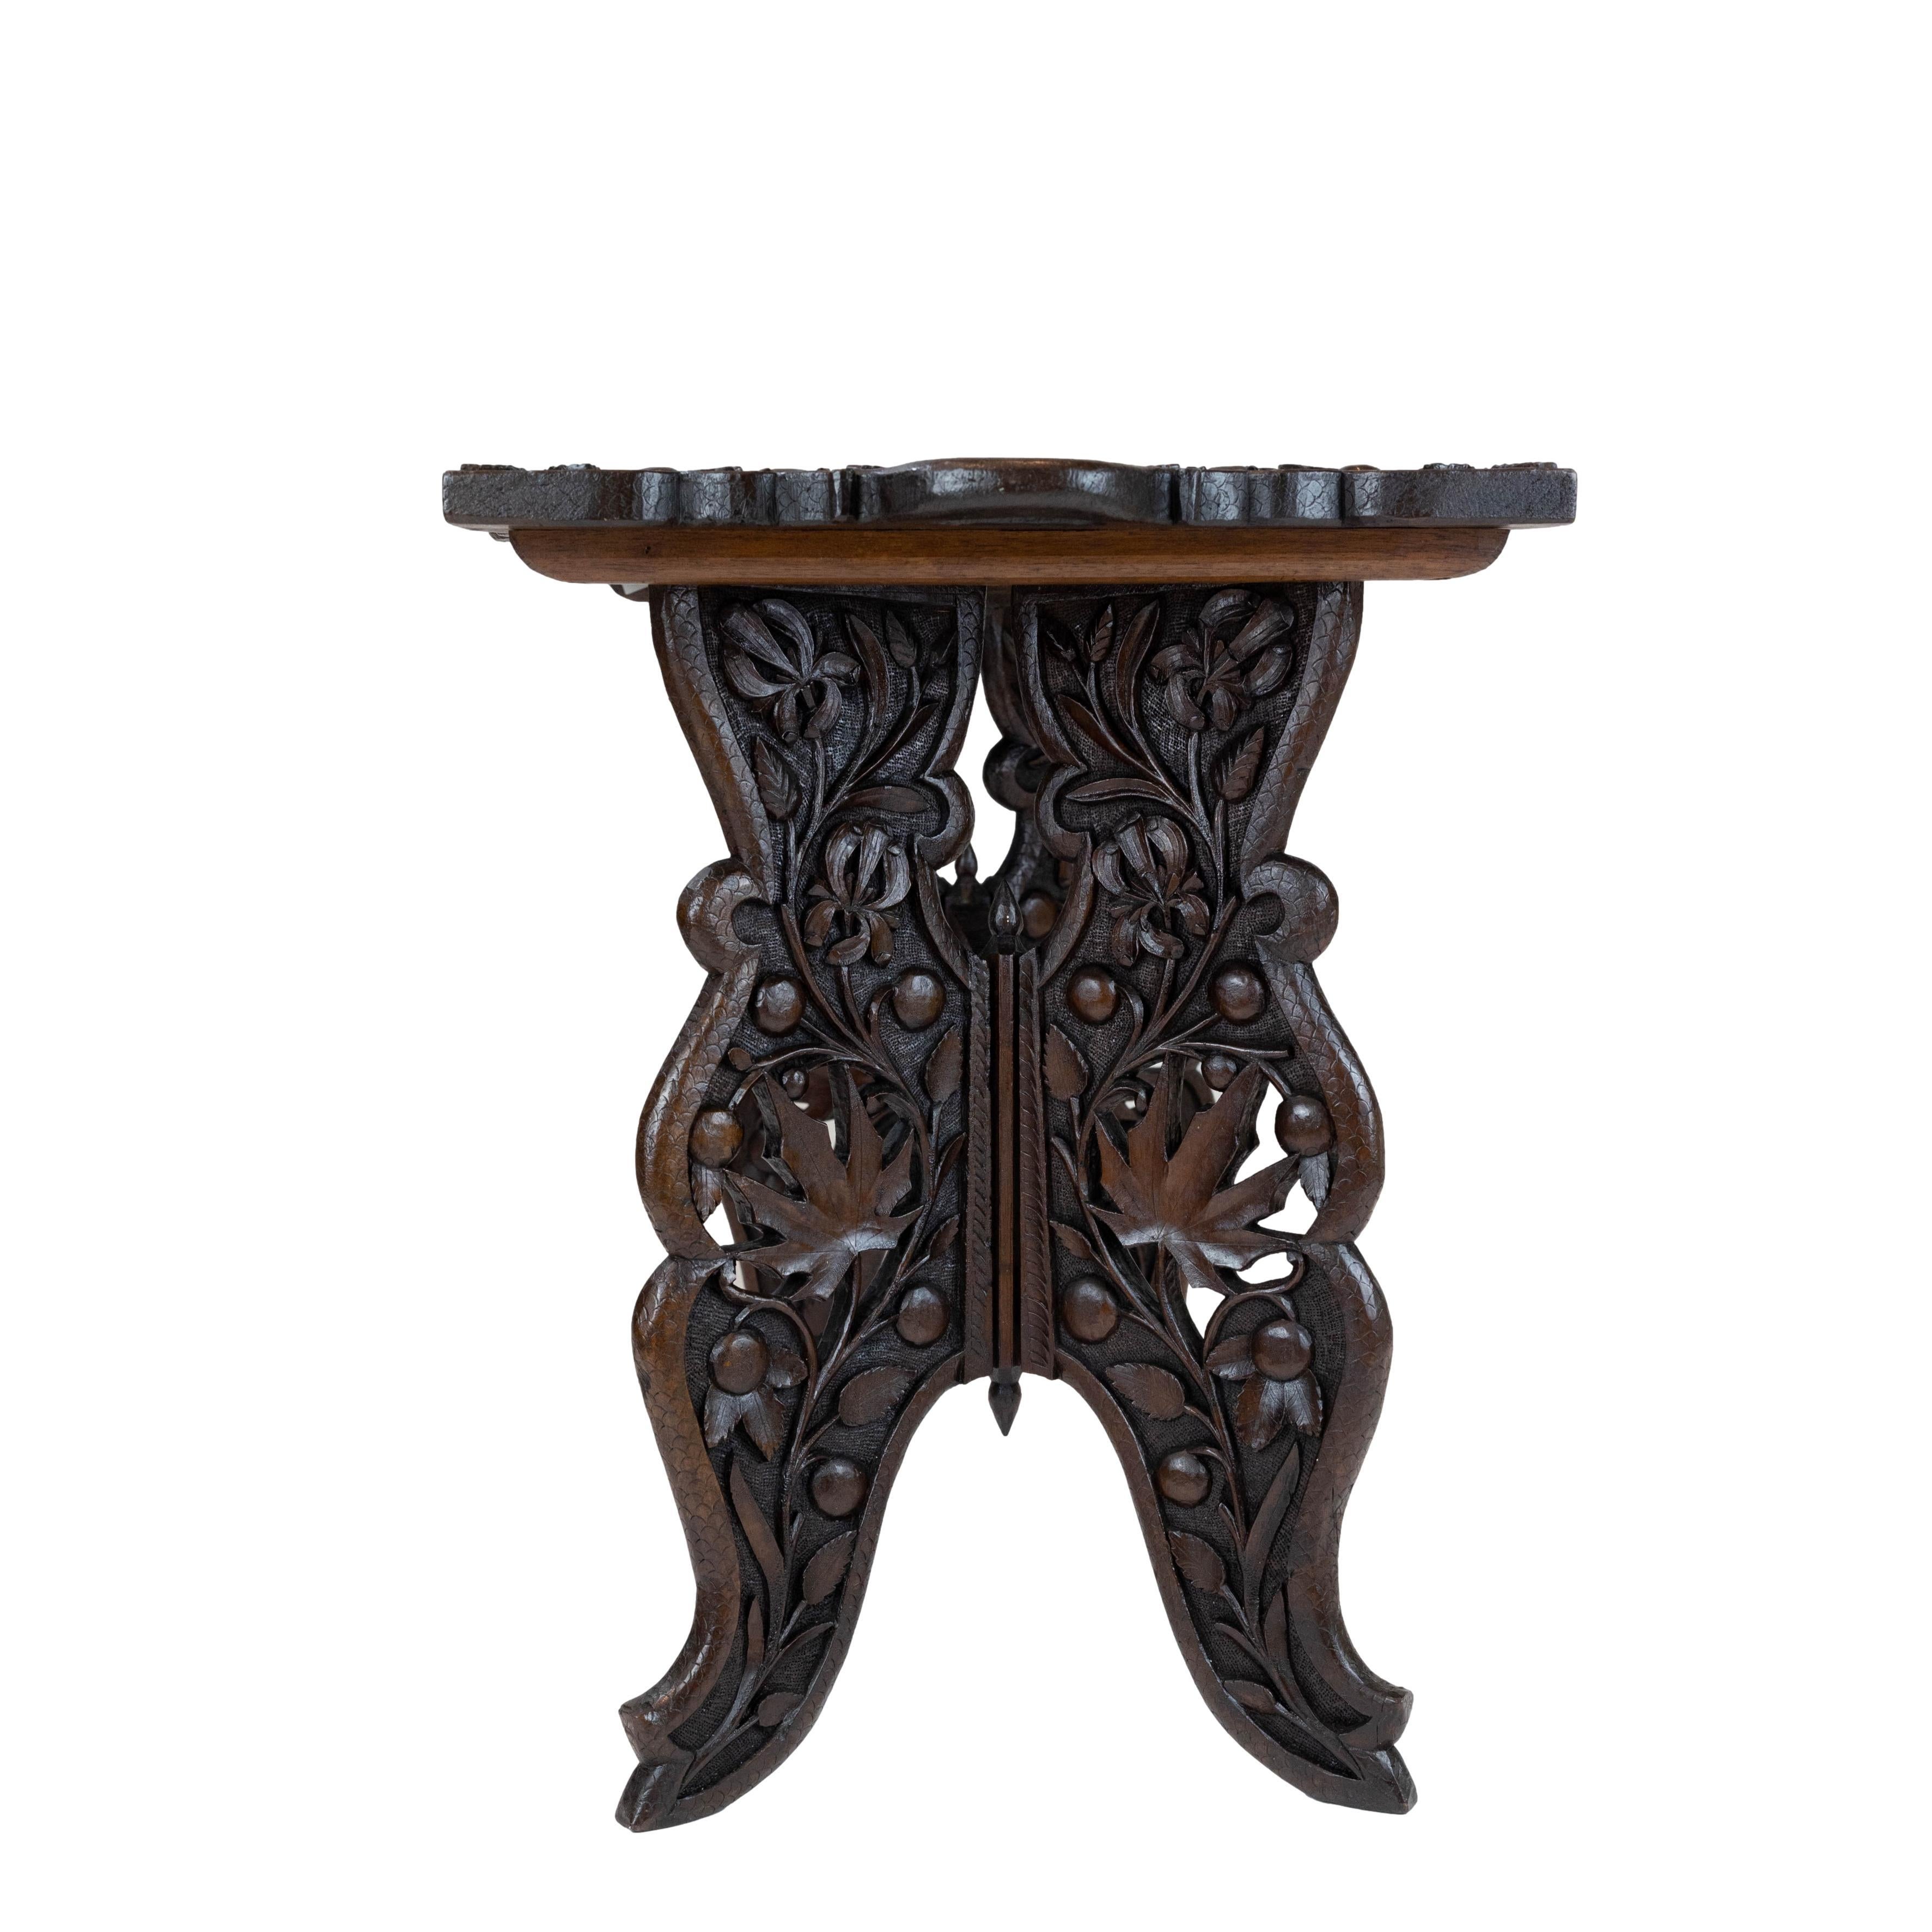 Elaborately Hand-Carved Solid Walnut Campaign Tray-Top Table, English, ca. 1890 For Sale 1